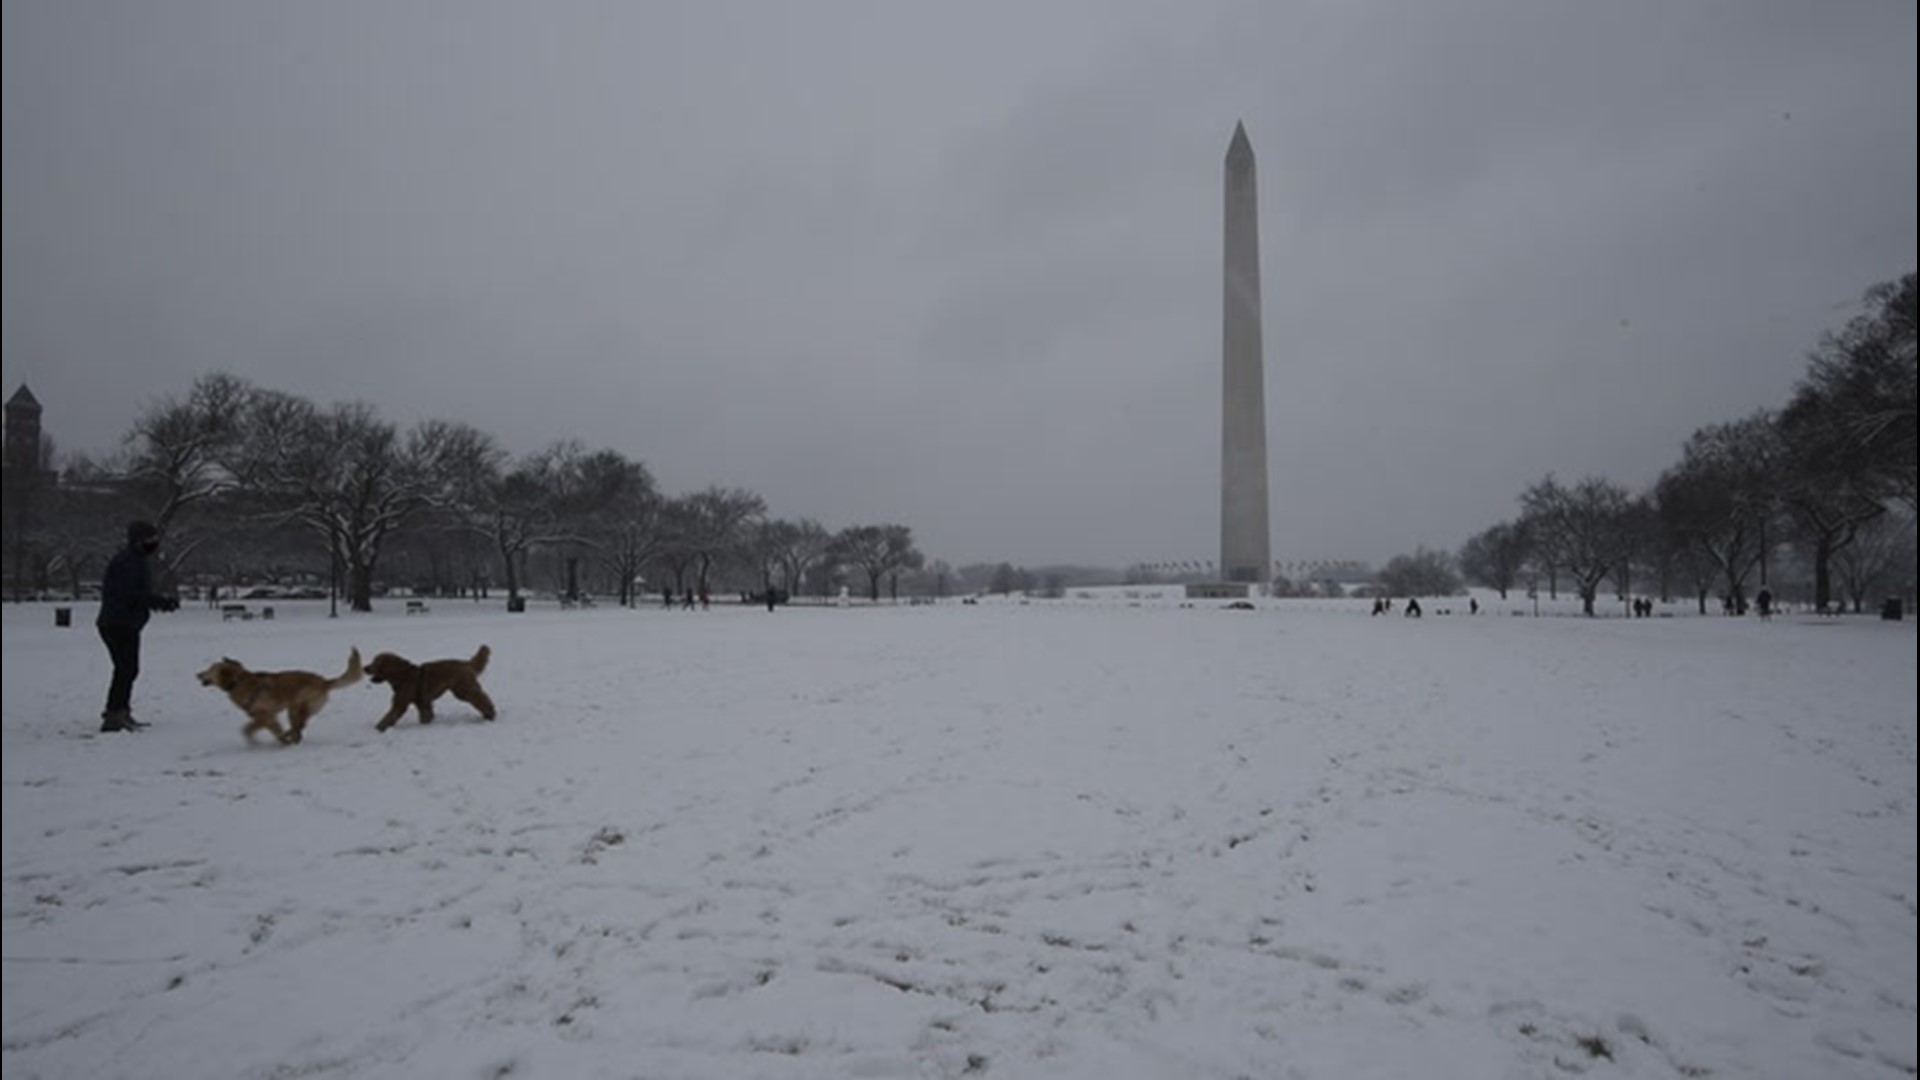 Take a look at some of the most iconic attractions in Washington D.C., after snow blanketed the city on Jan. 31.